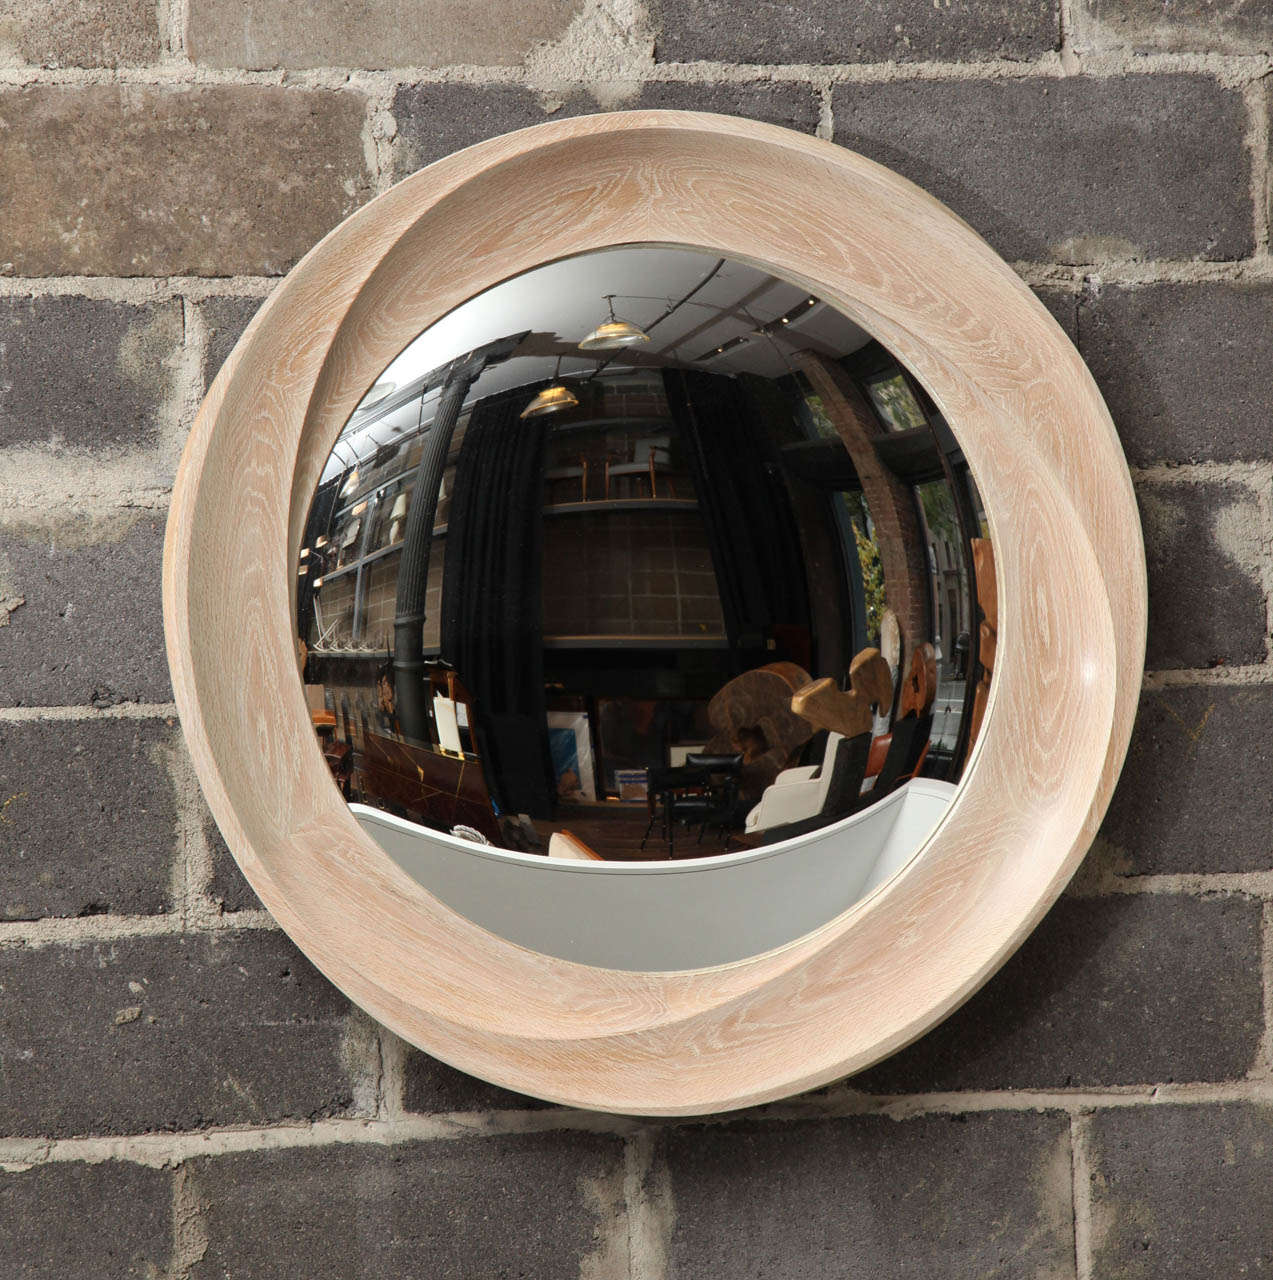 Convex mirror with limed oak frame by Carol Egan

*Please note this item is by order